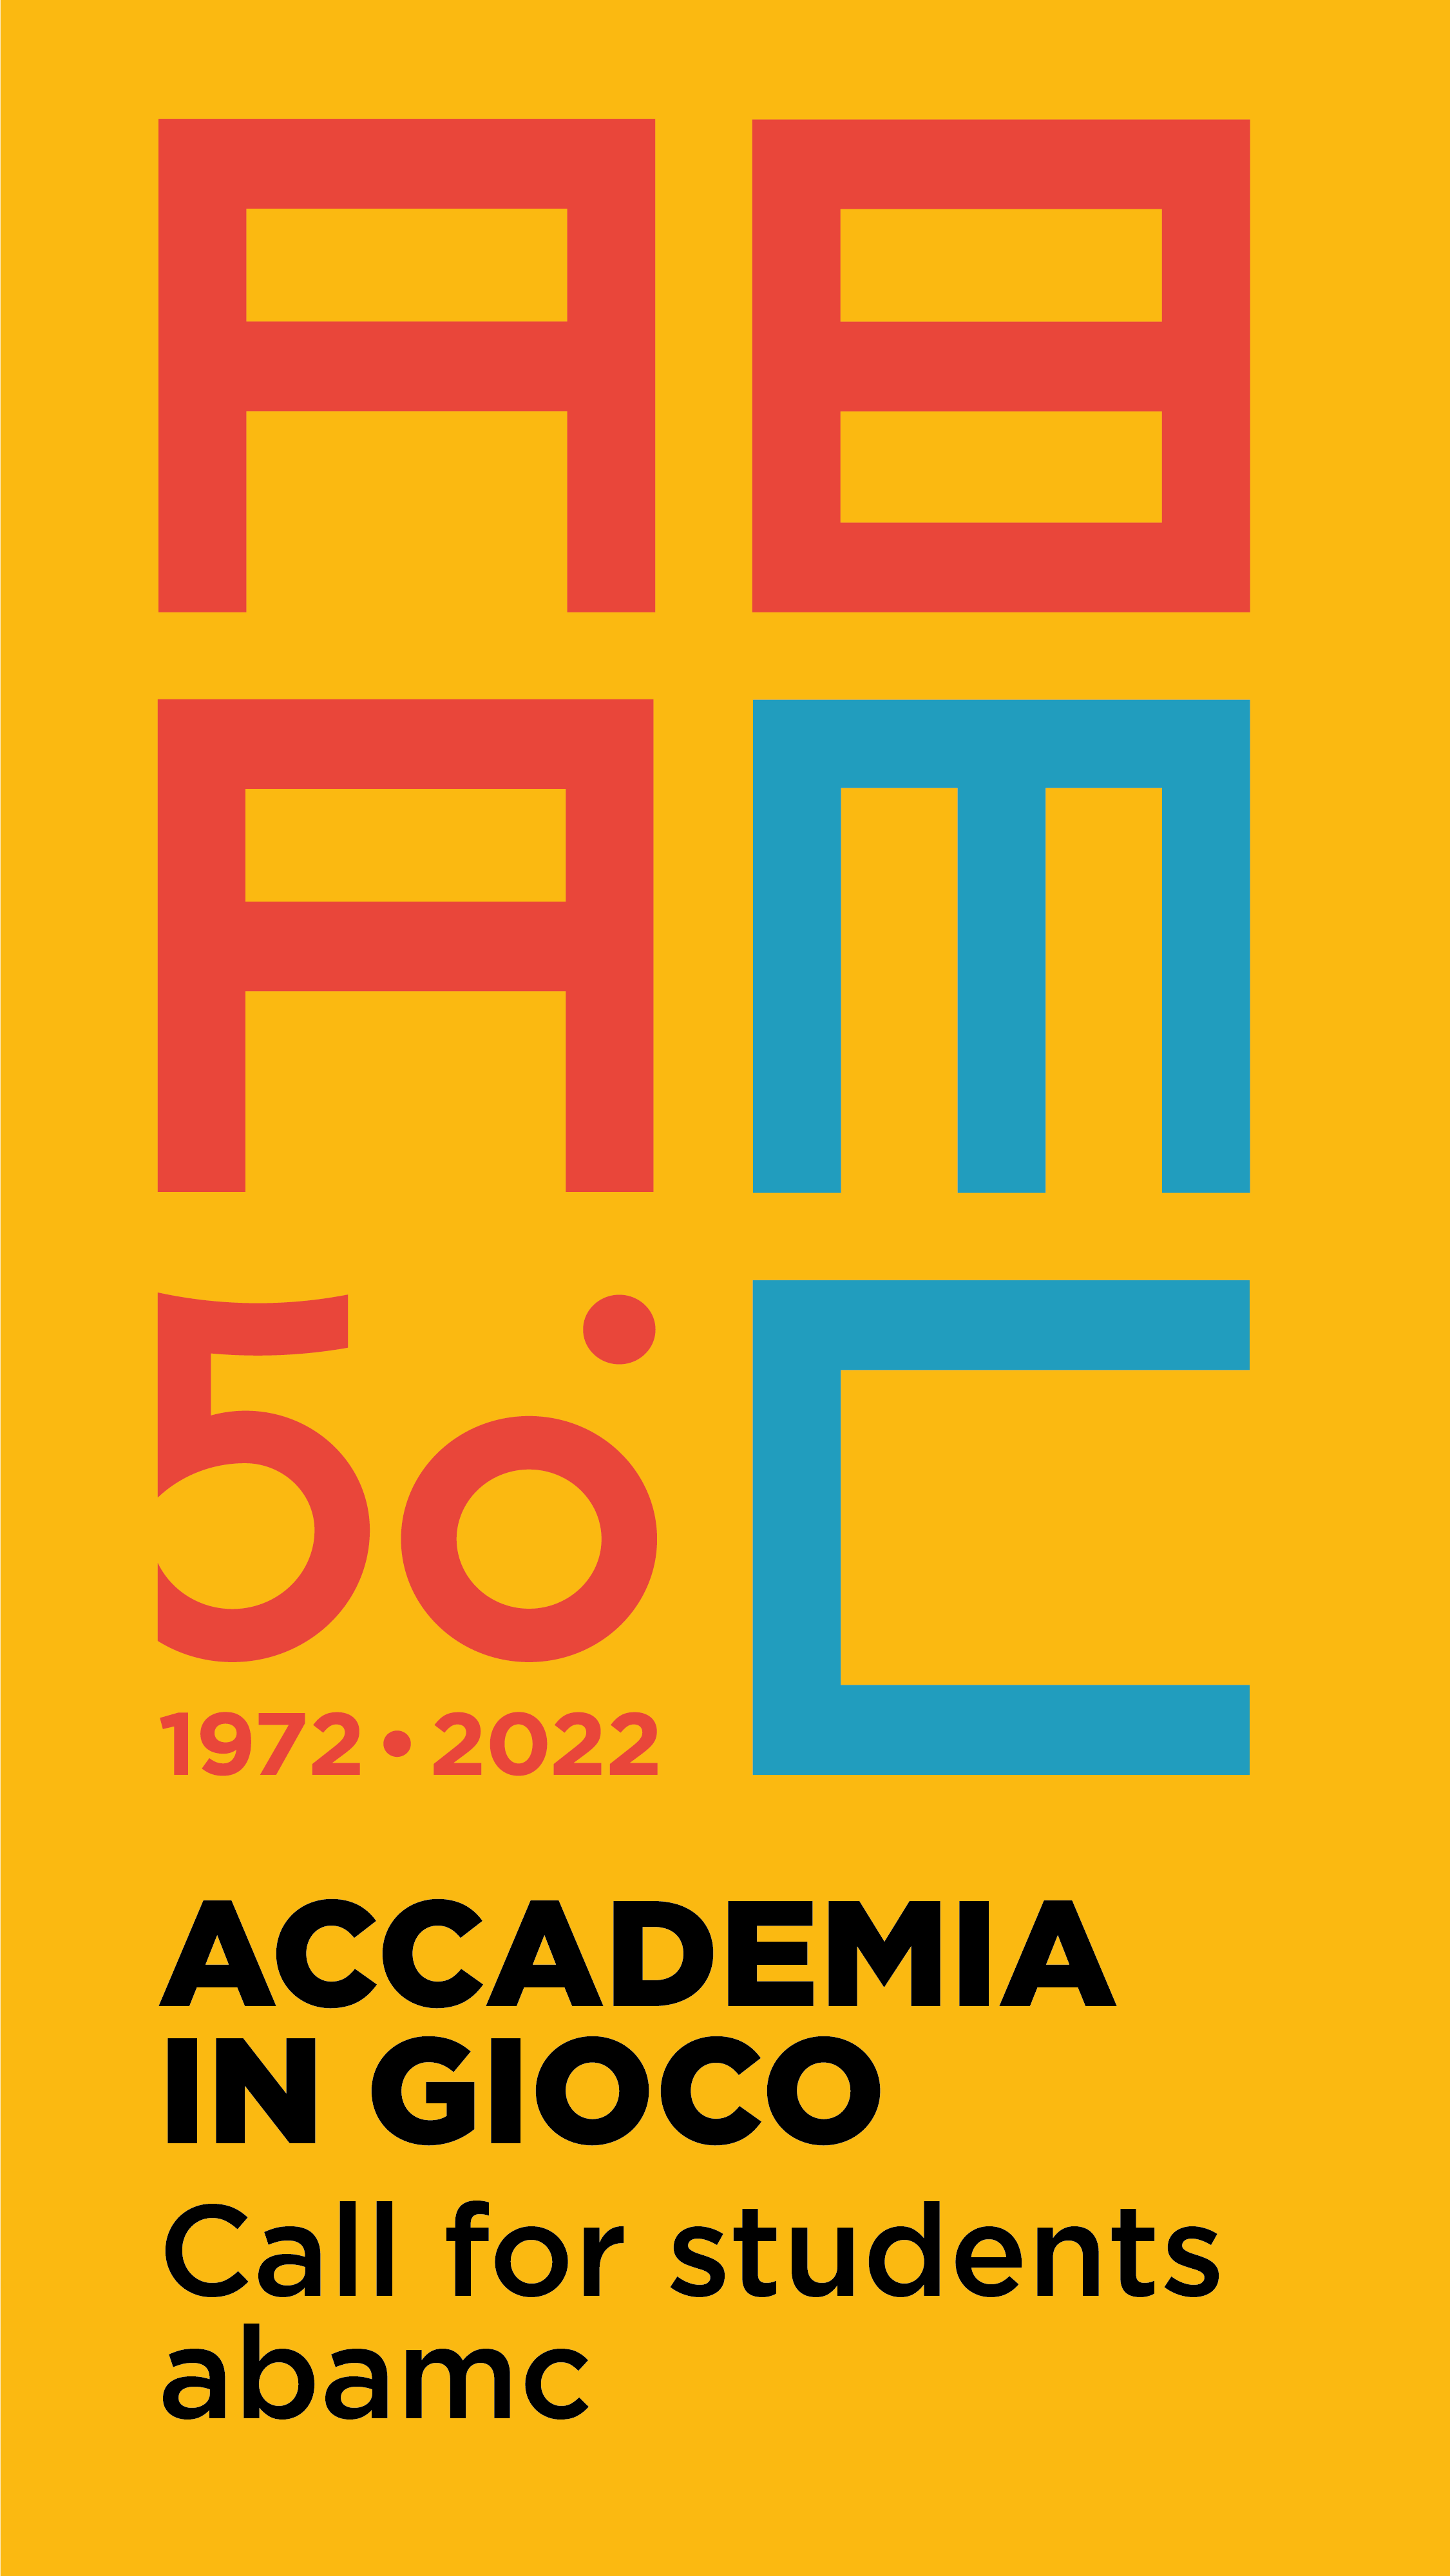 ACCADEMIA IN GIOCO CALL FOR STUDENTS ABAMC